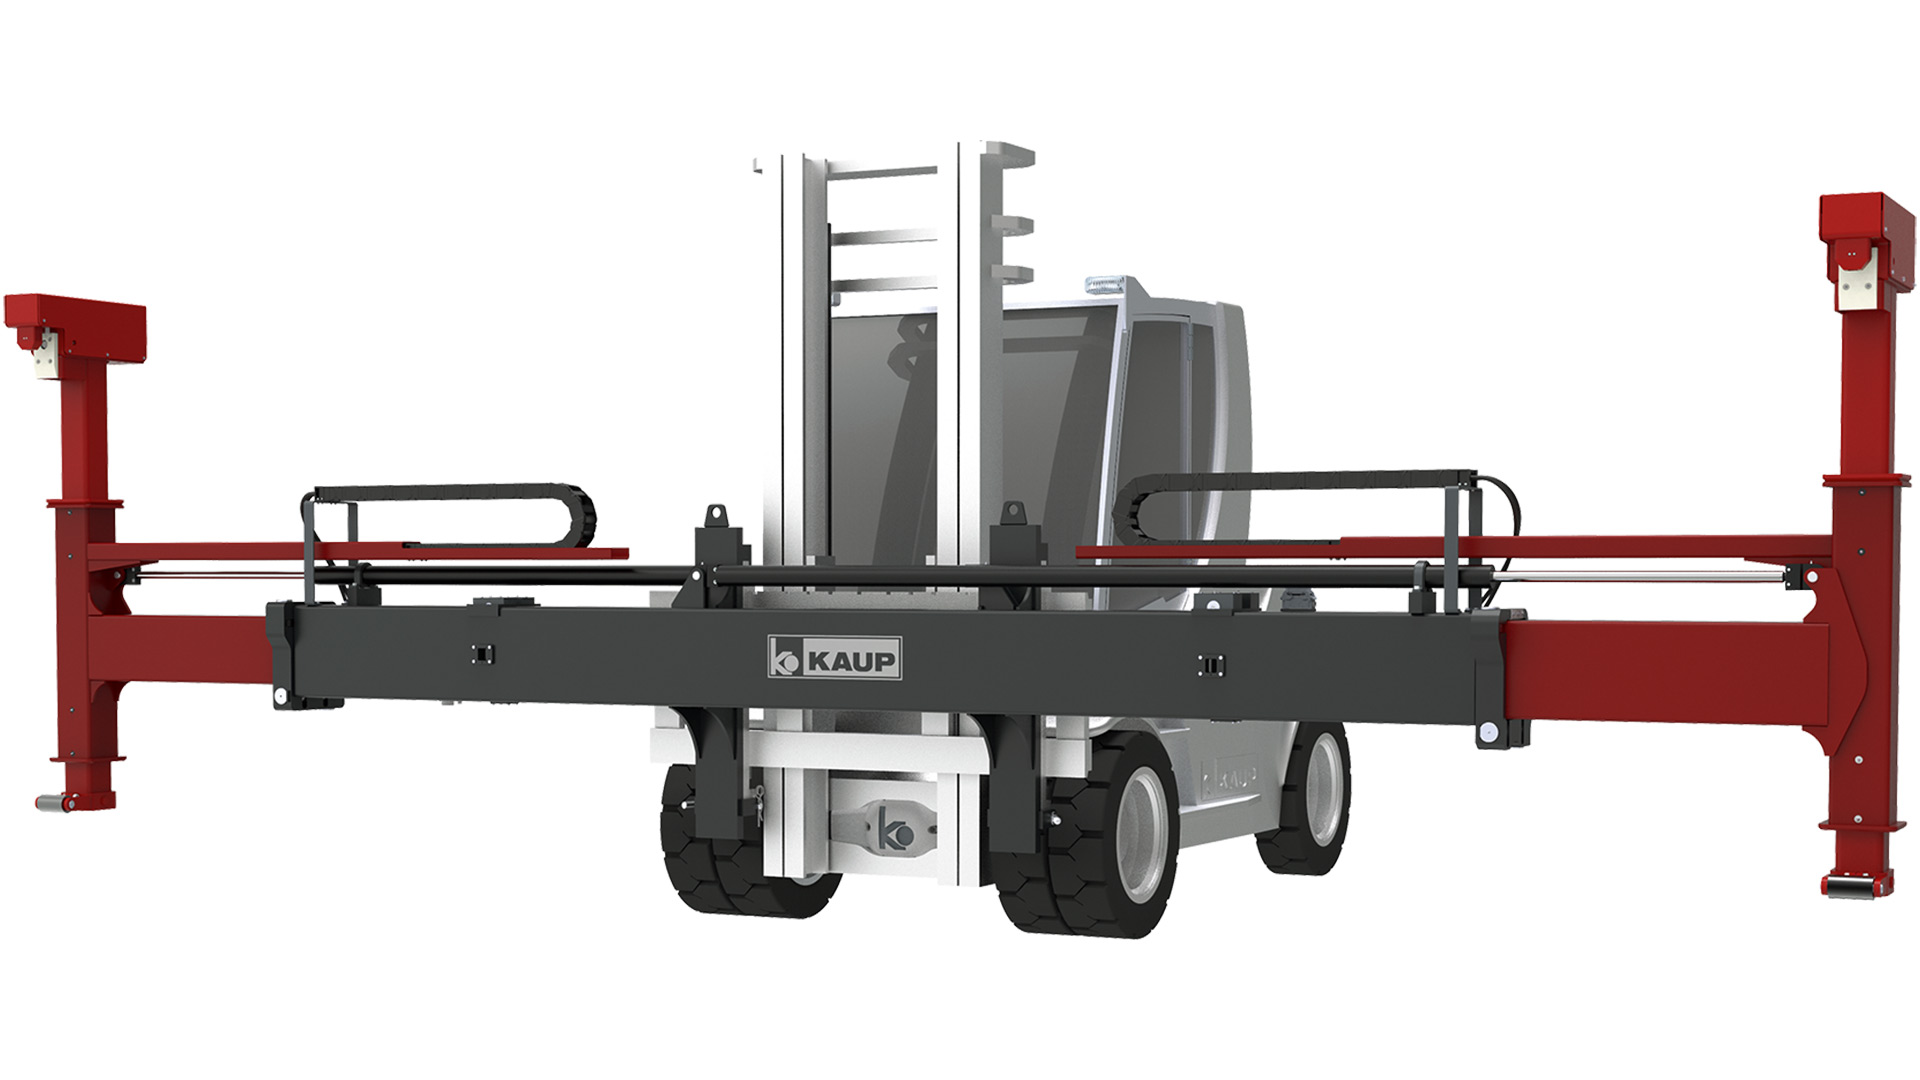 Illustration of a forklift truck with wide container clamp and components highlighted in red